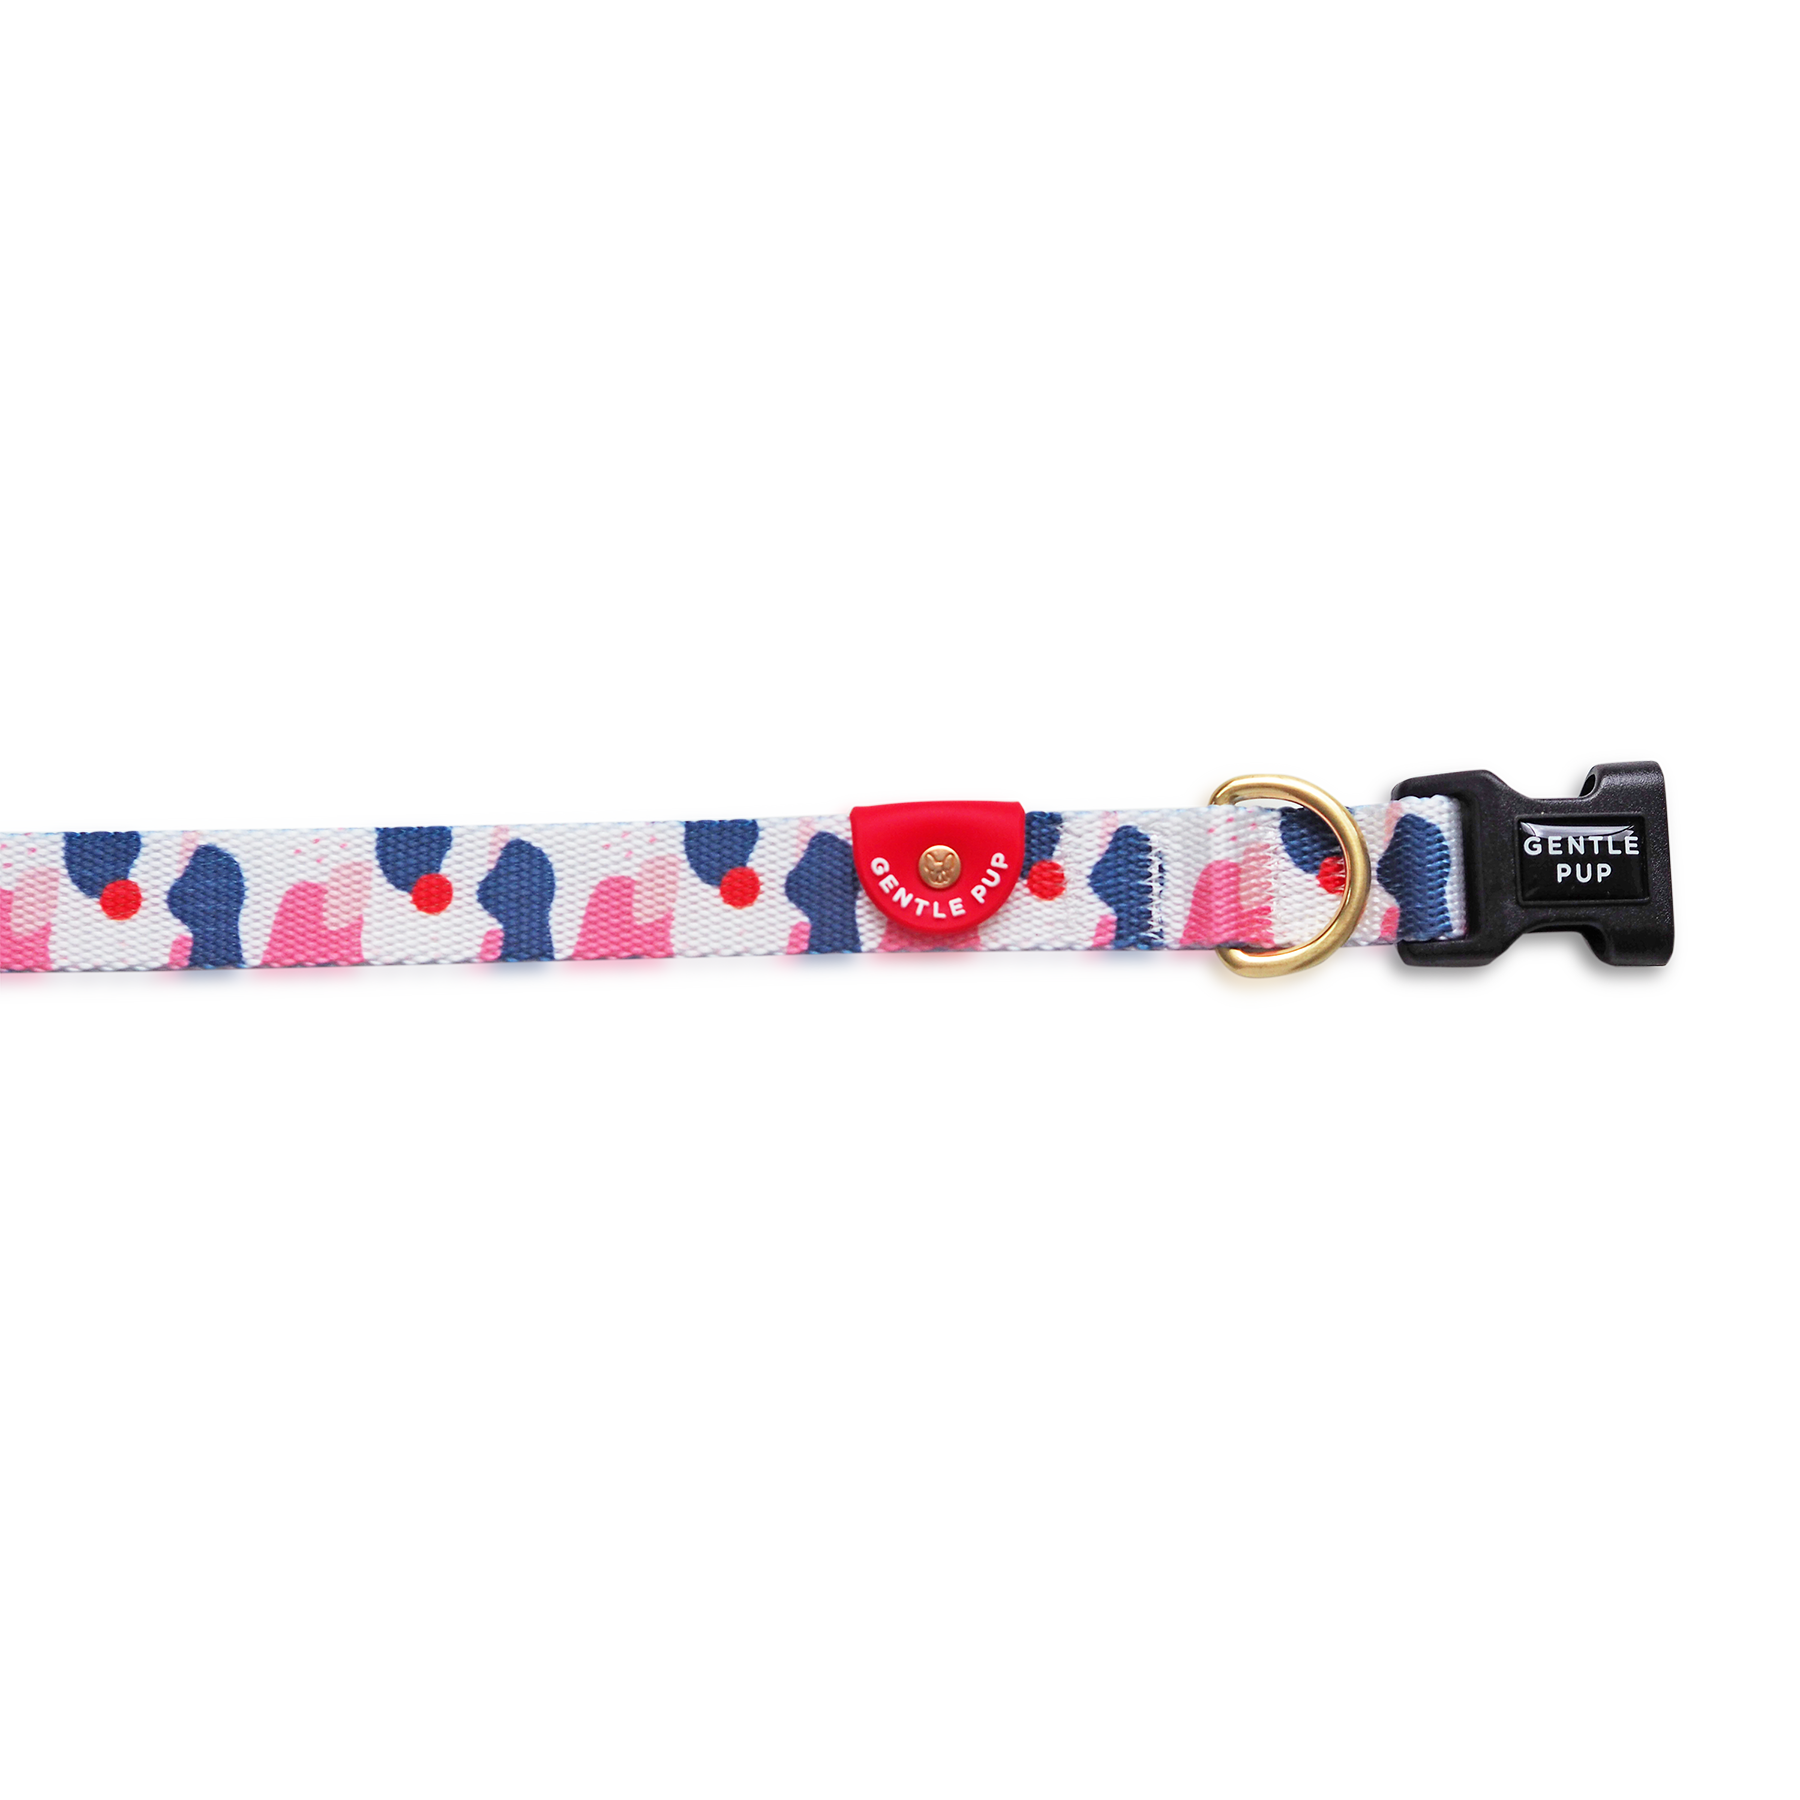 Gentle Pup Dog Collar - Lovely Leia